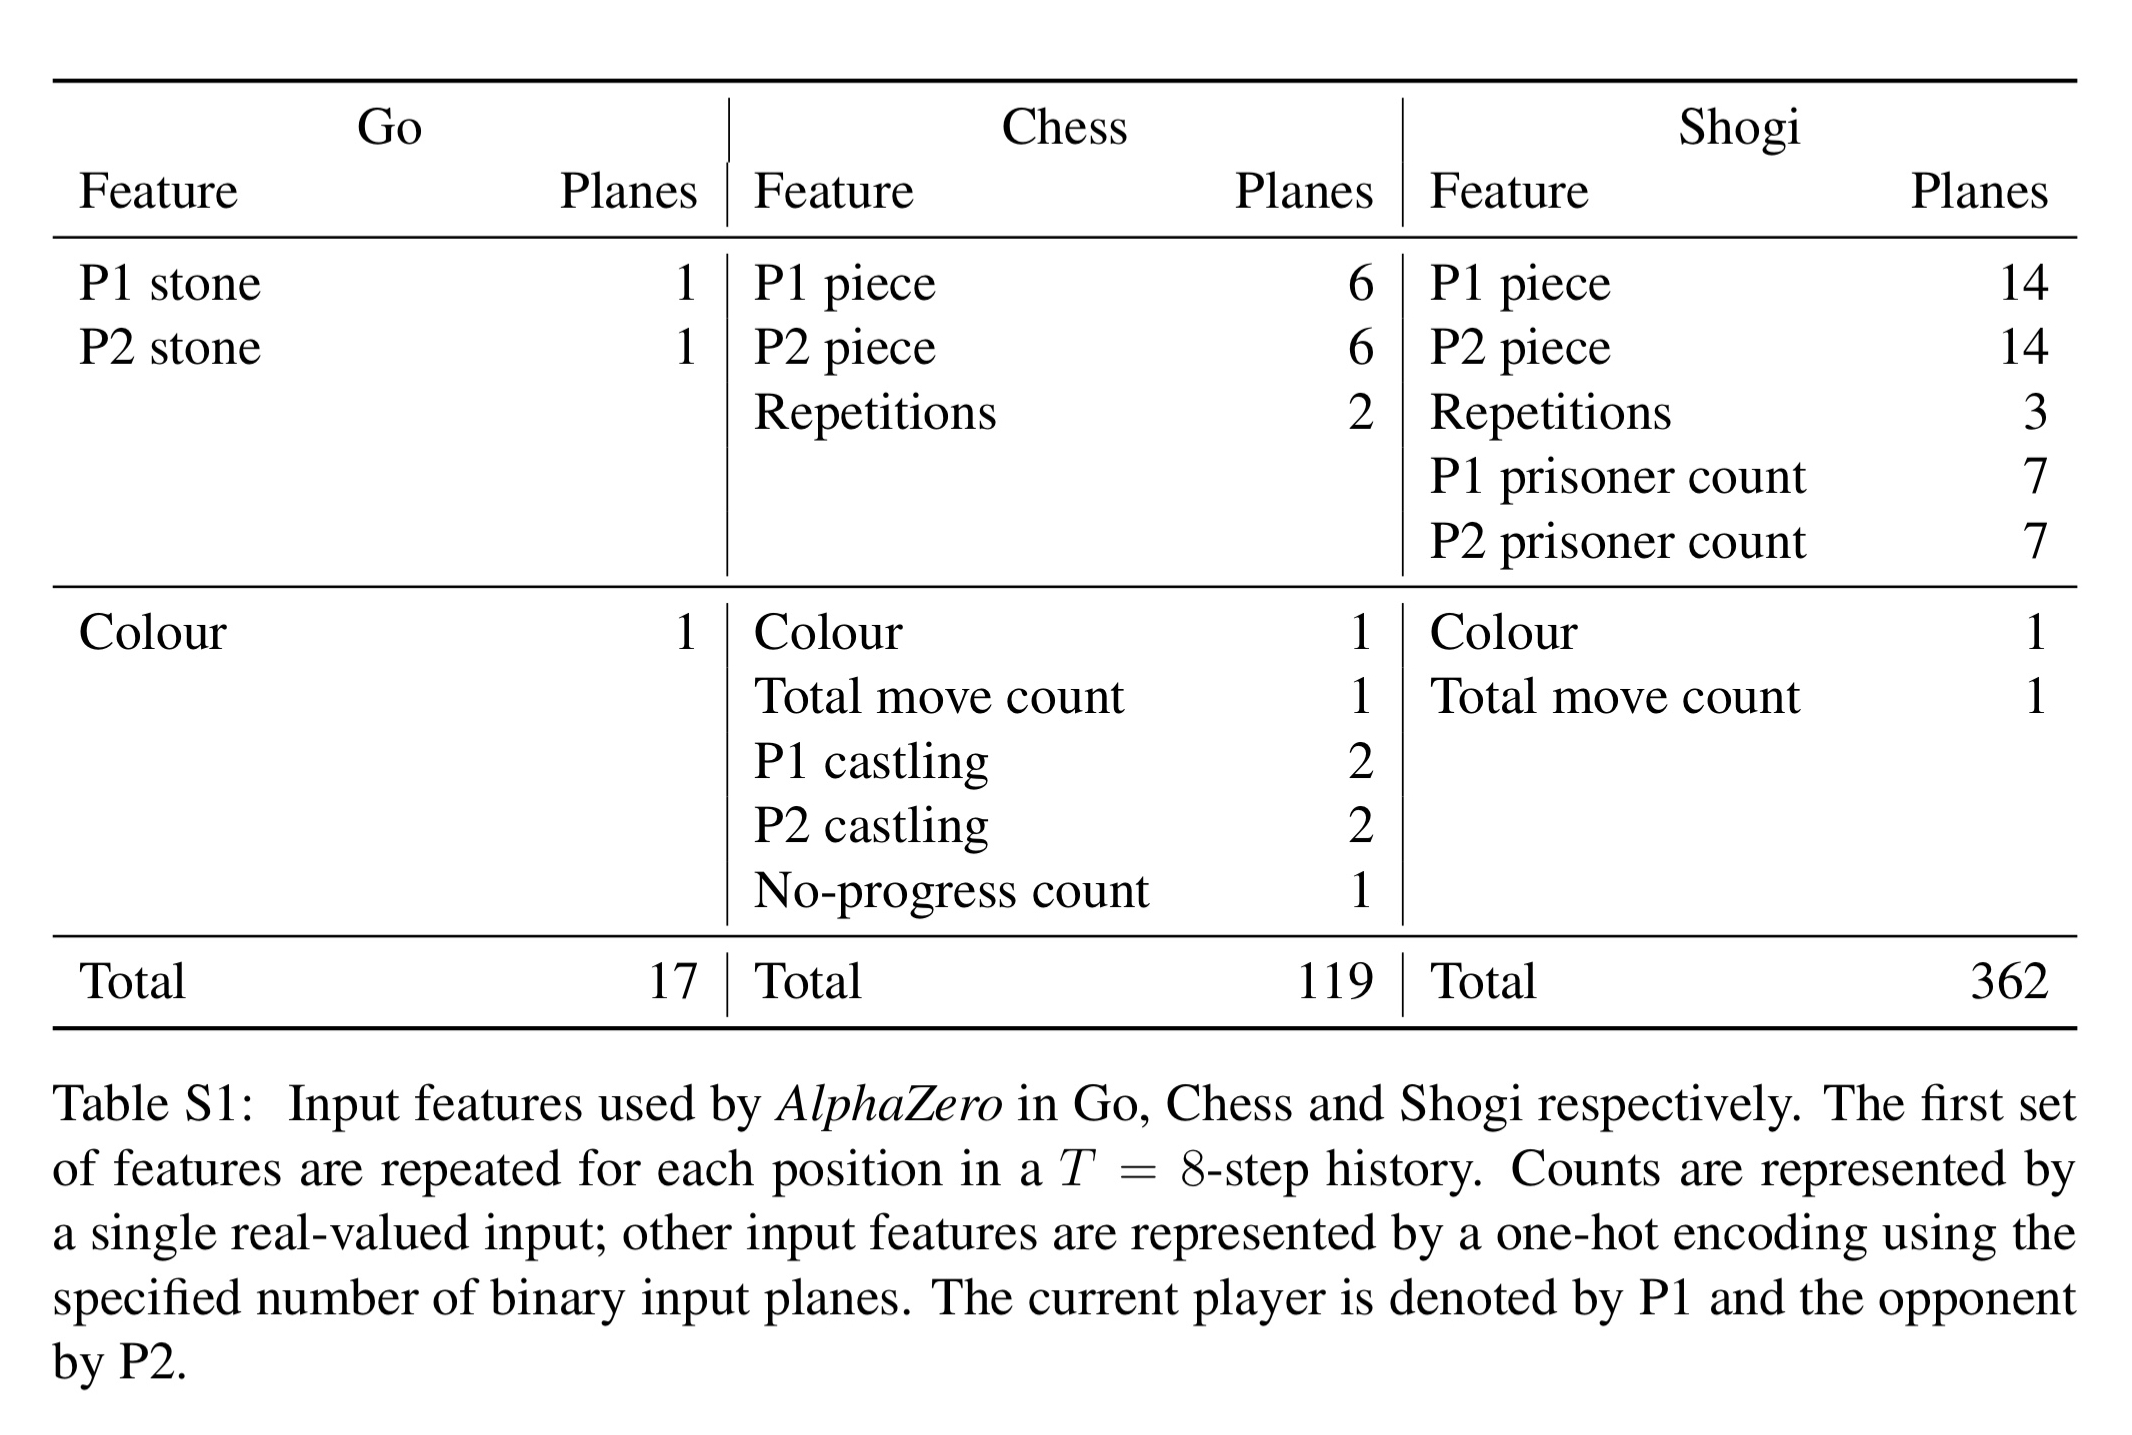 Mastering chess and shogi by self-play with a general